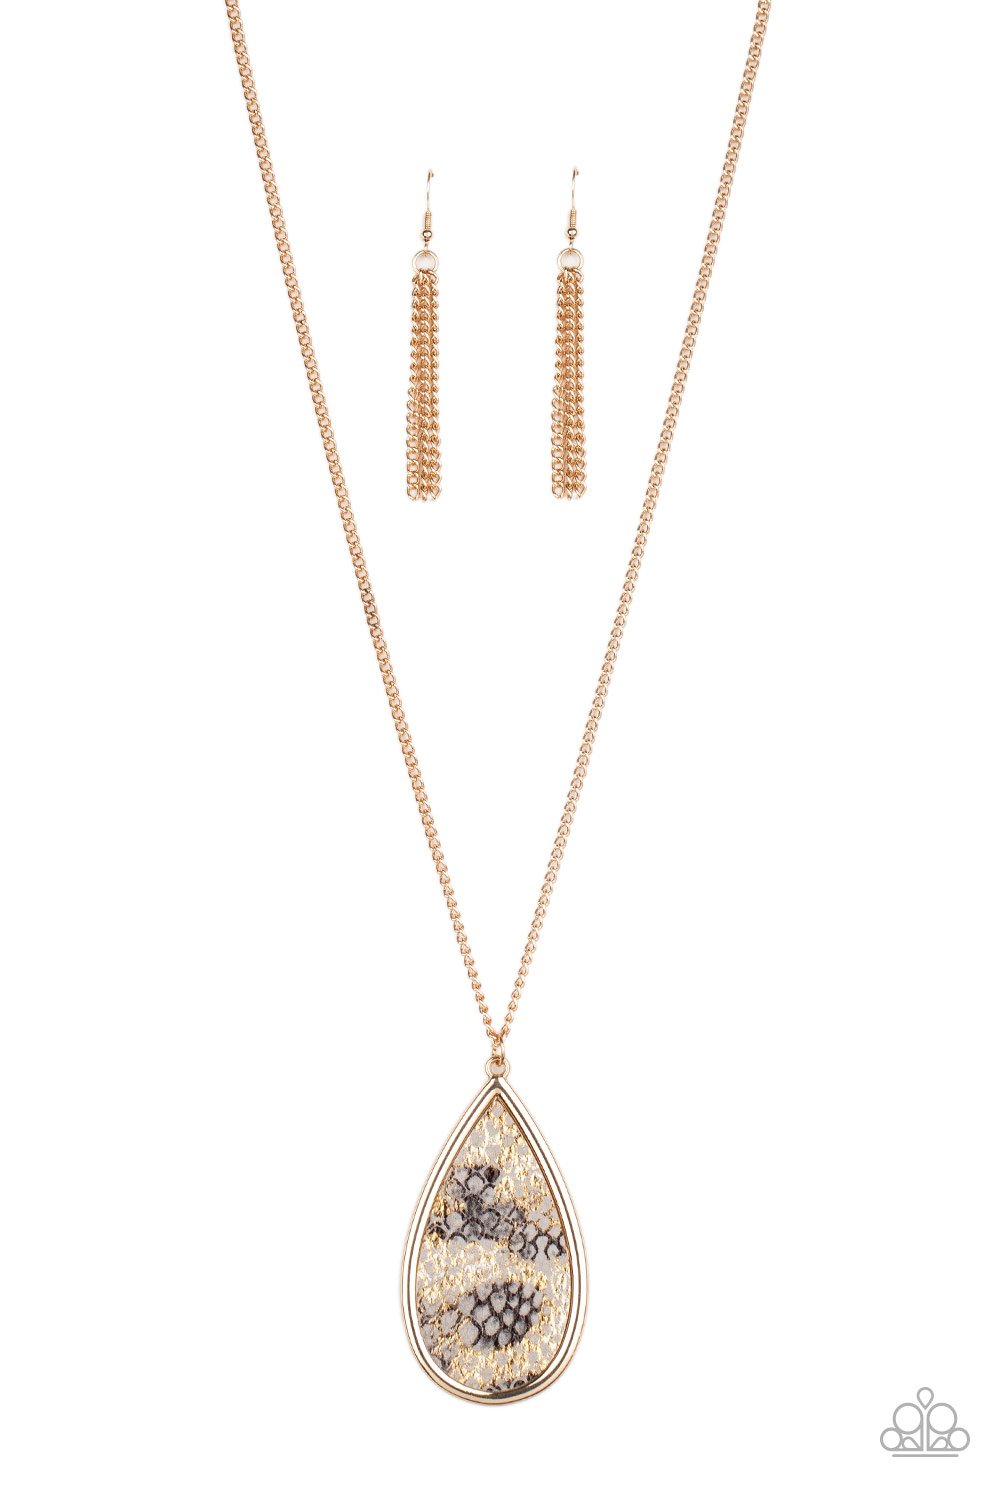 Artificial Animal Gold Necklace - Daria's Blings N Things